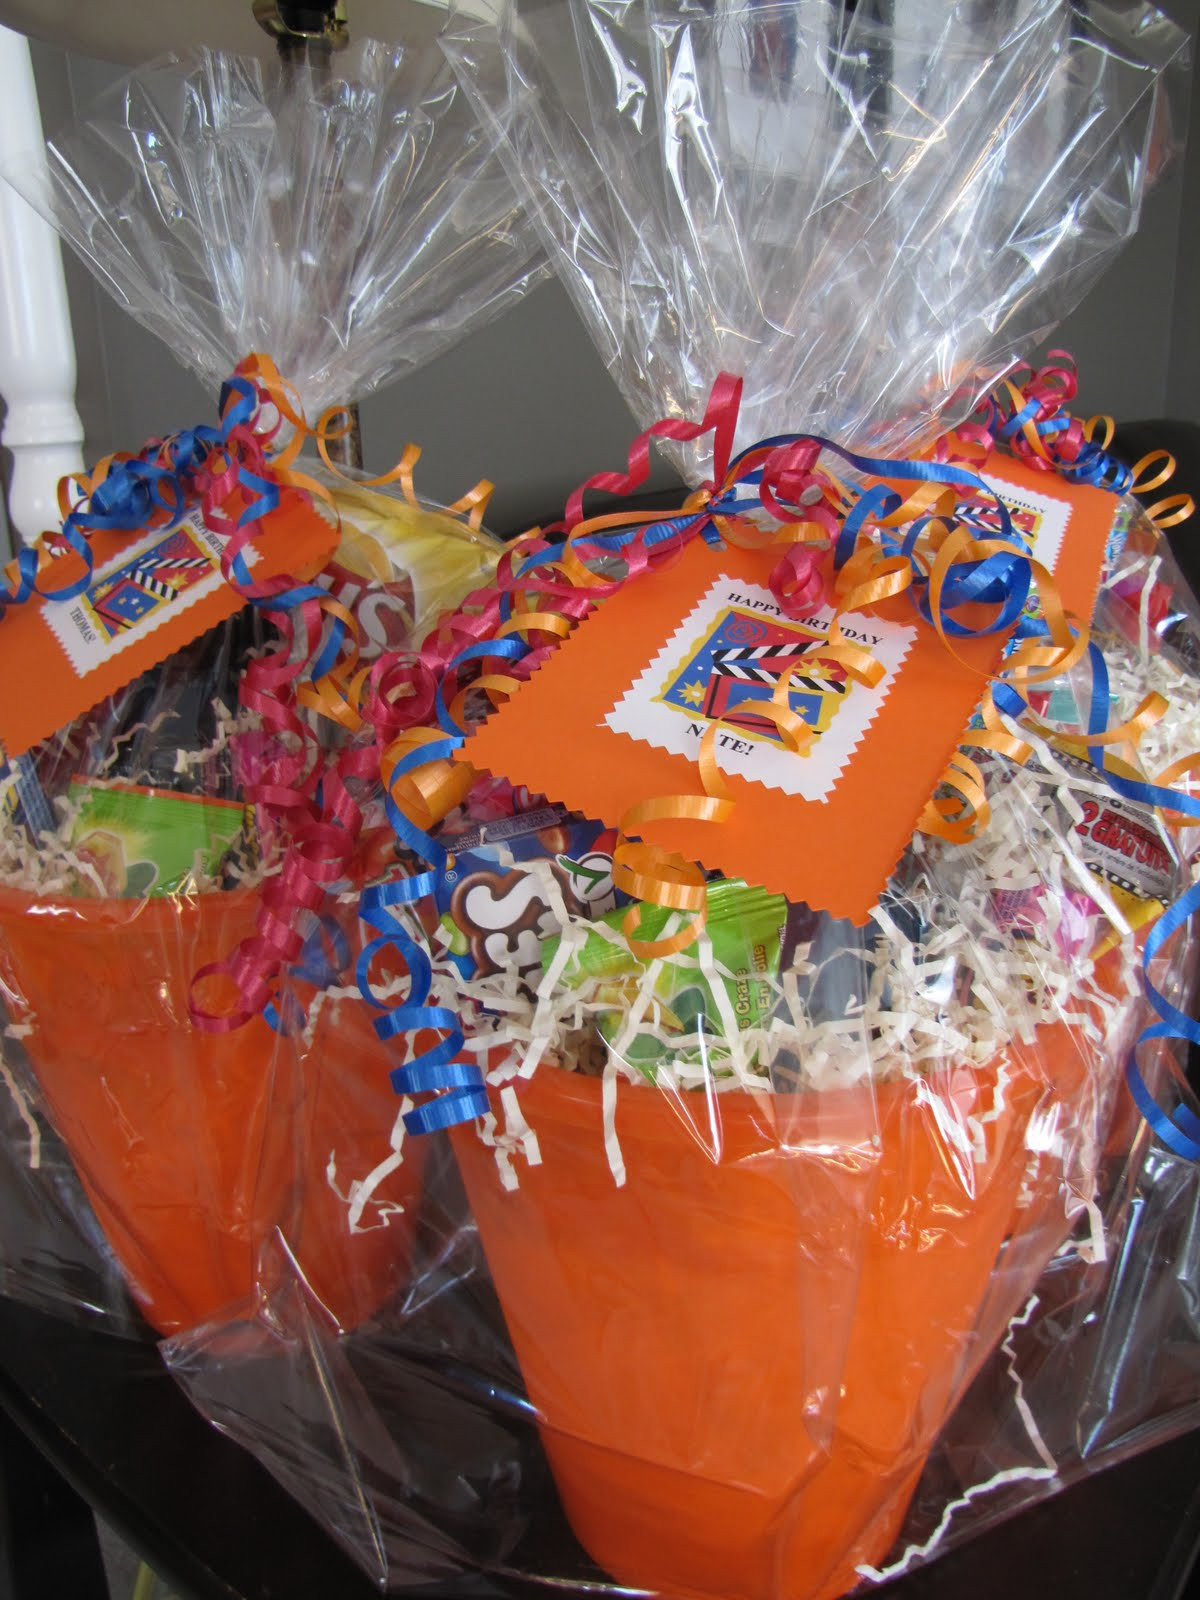 Child Birthday Gift Baskets
 This is what s up Kids Birthday Gift Ideas